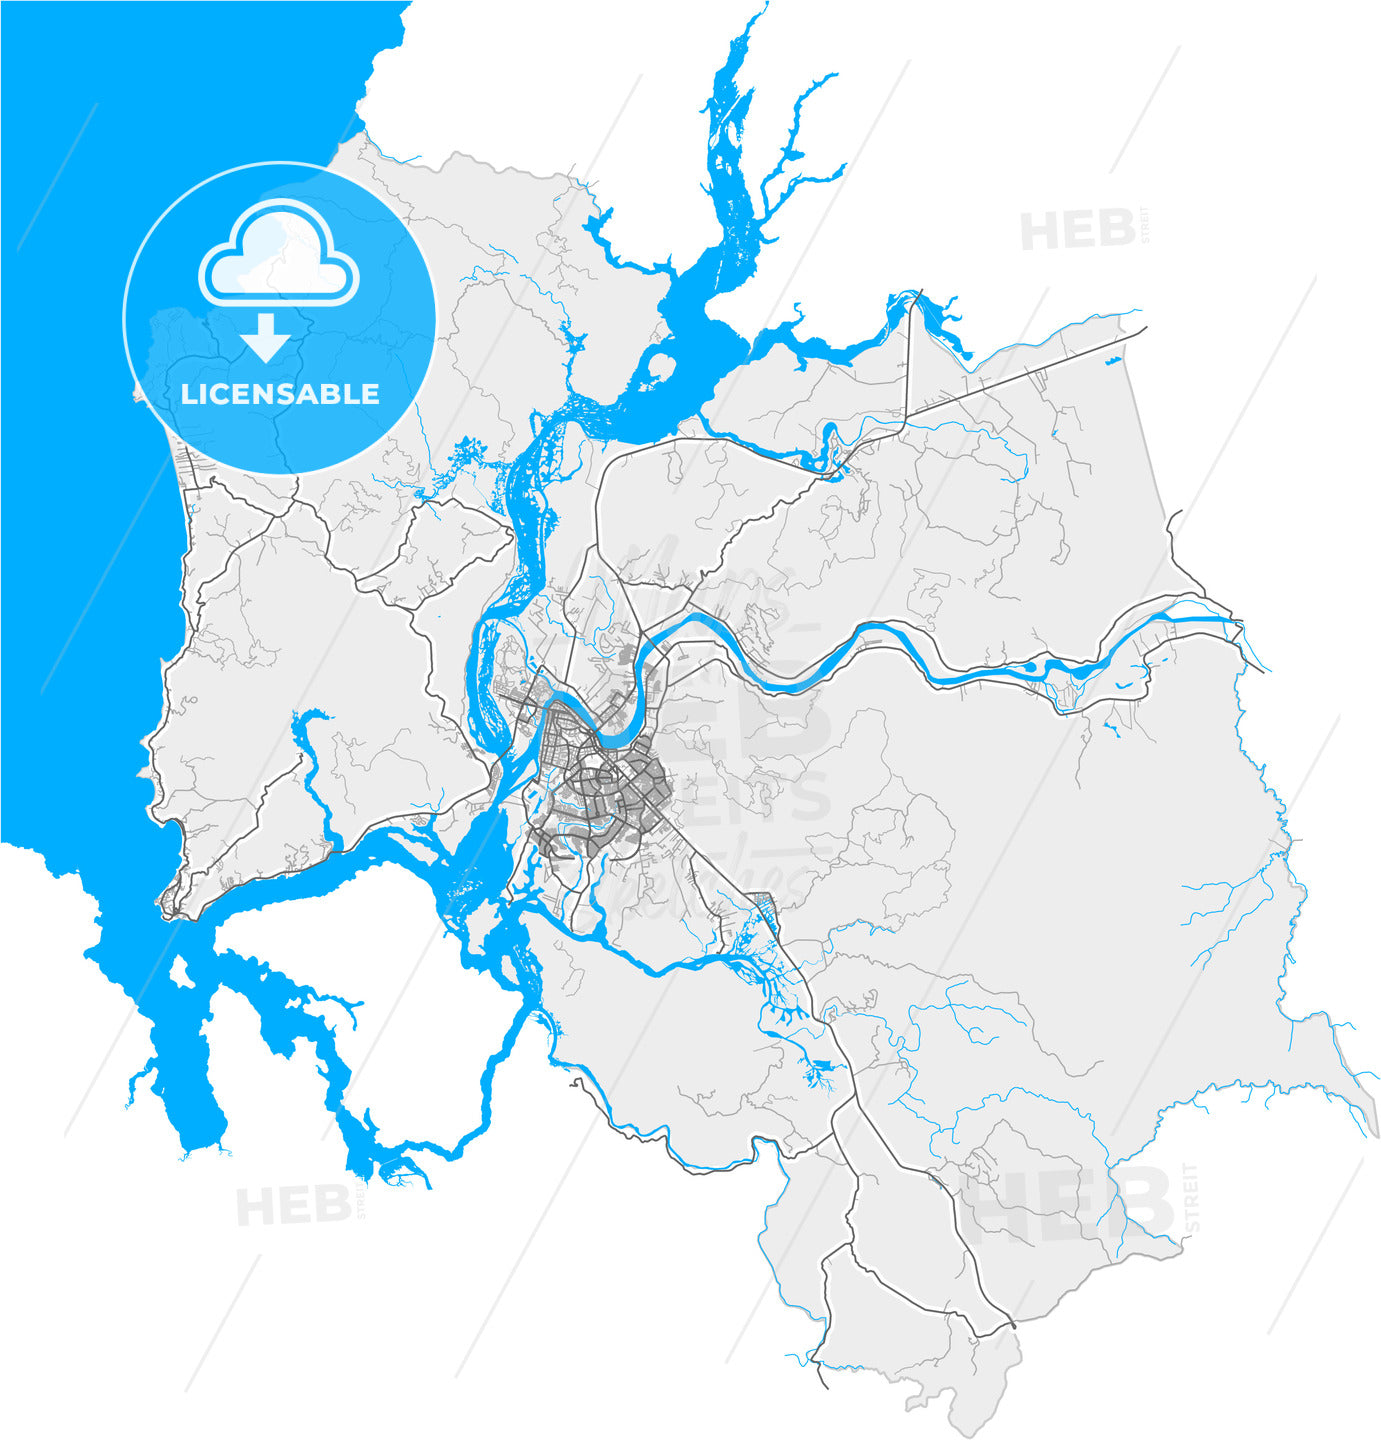 Valdivia, Chile, high quality vector map